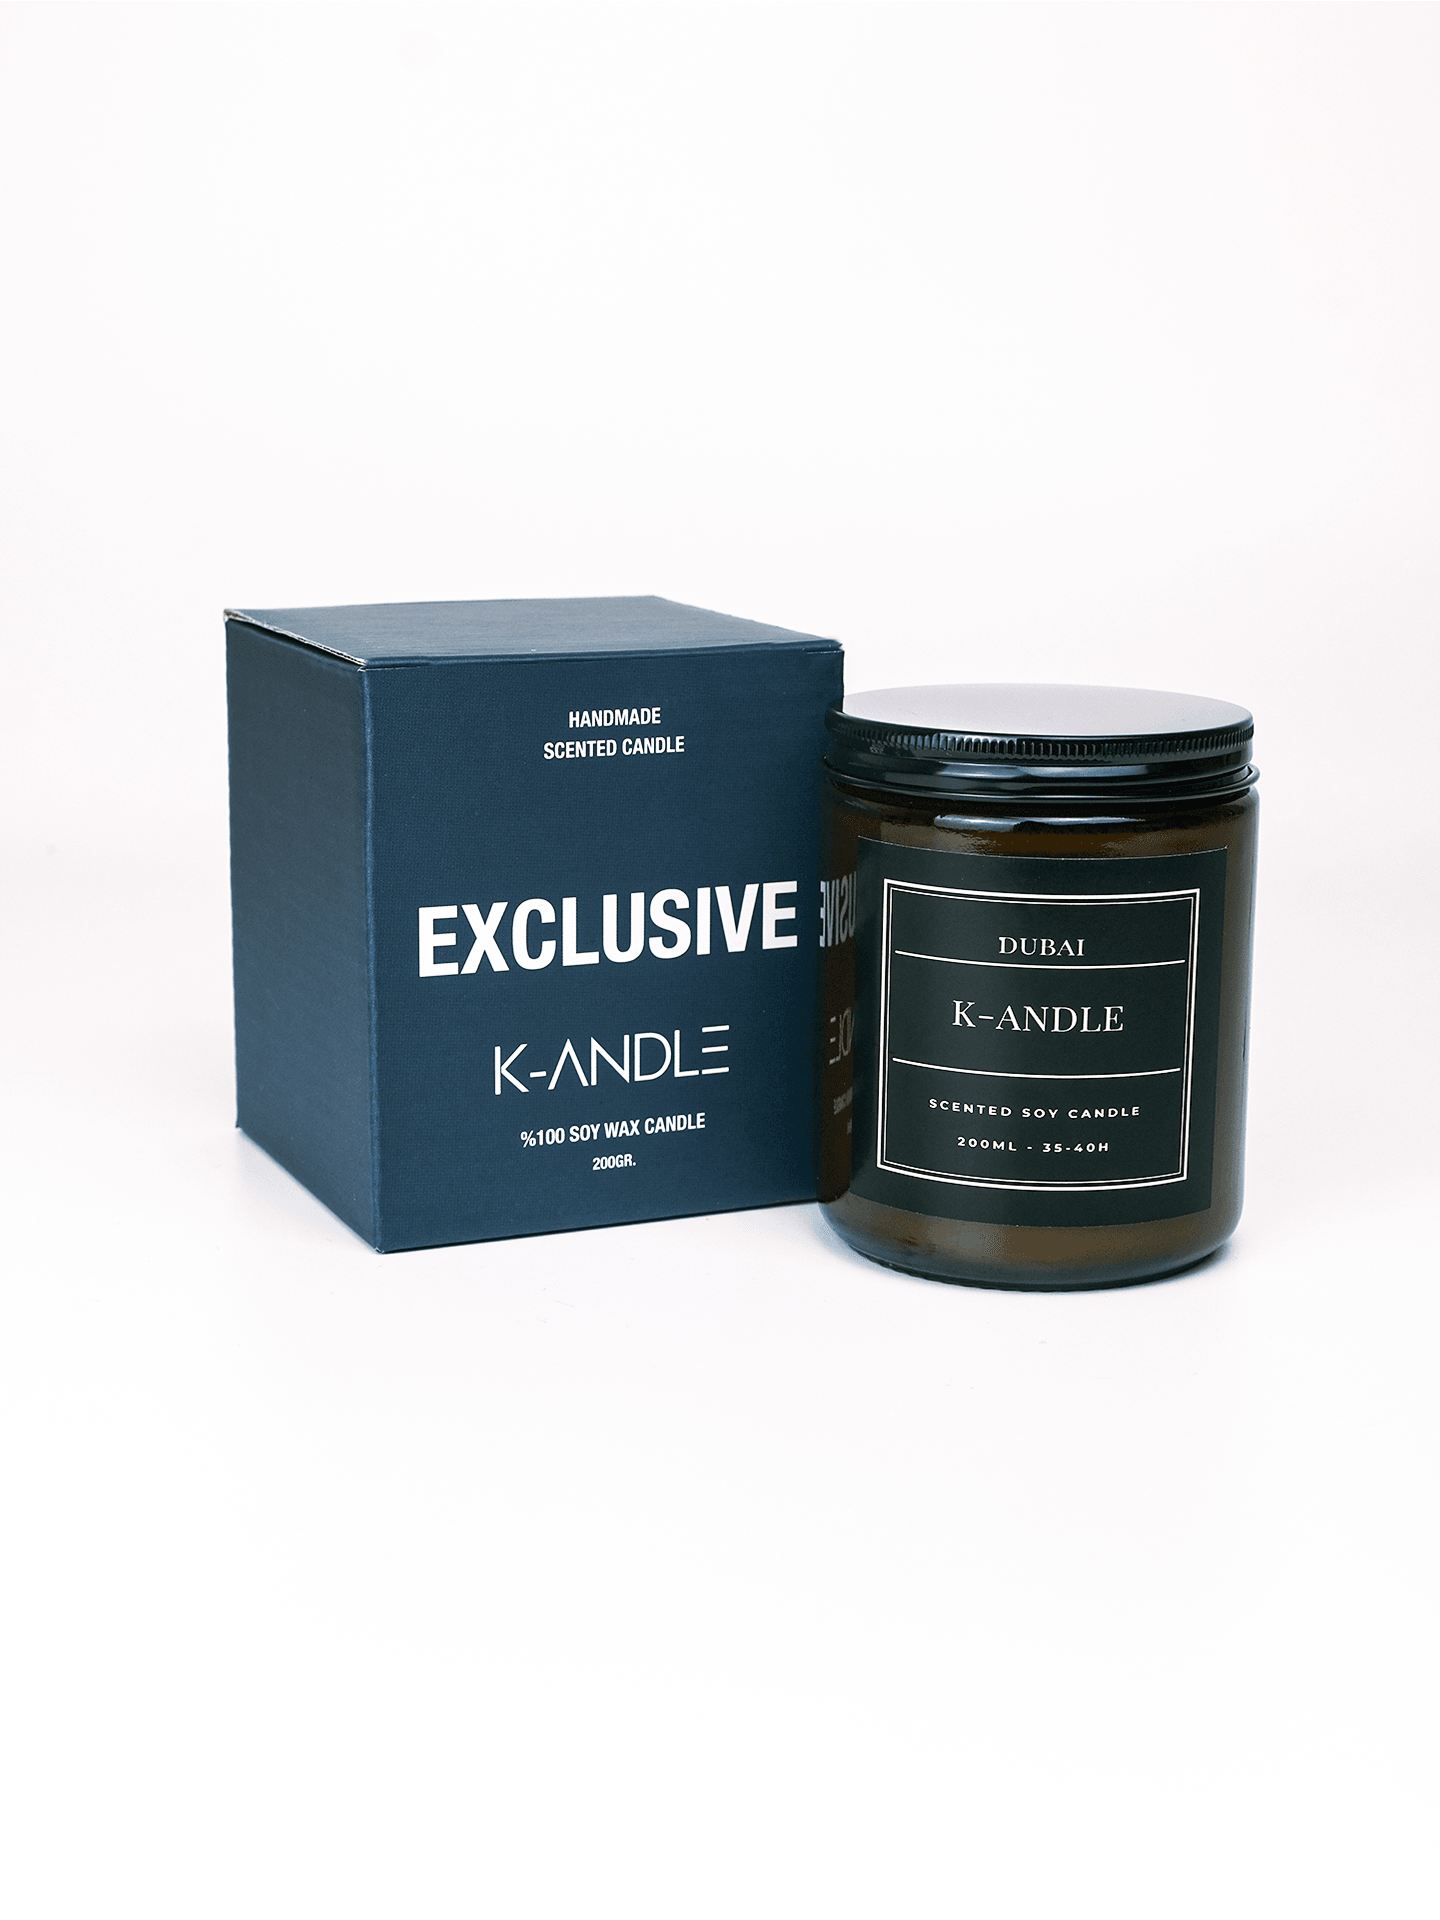 Dubai Scented Soy Candle